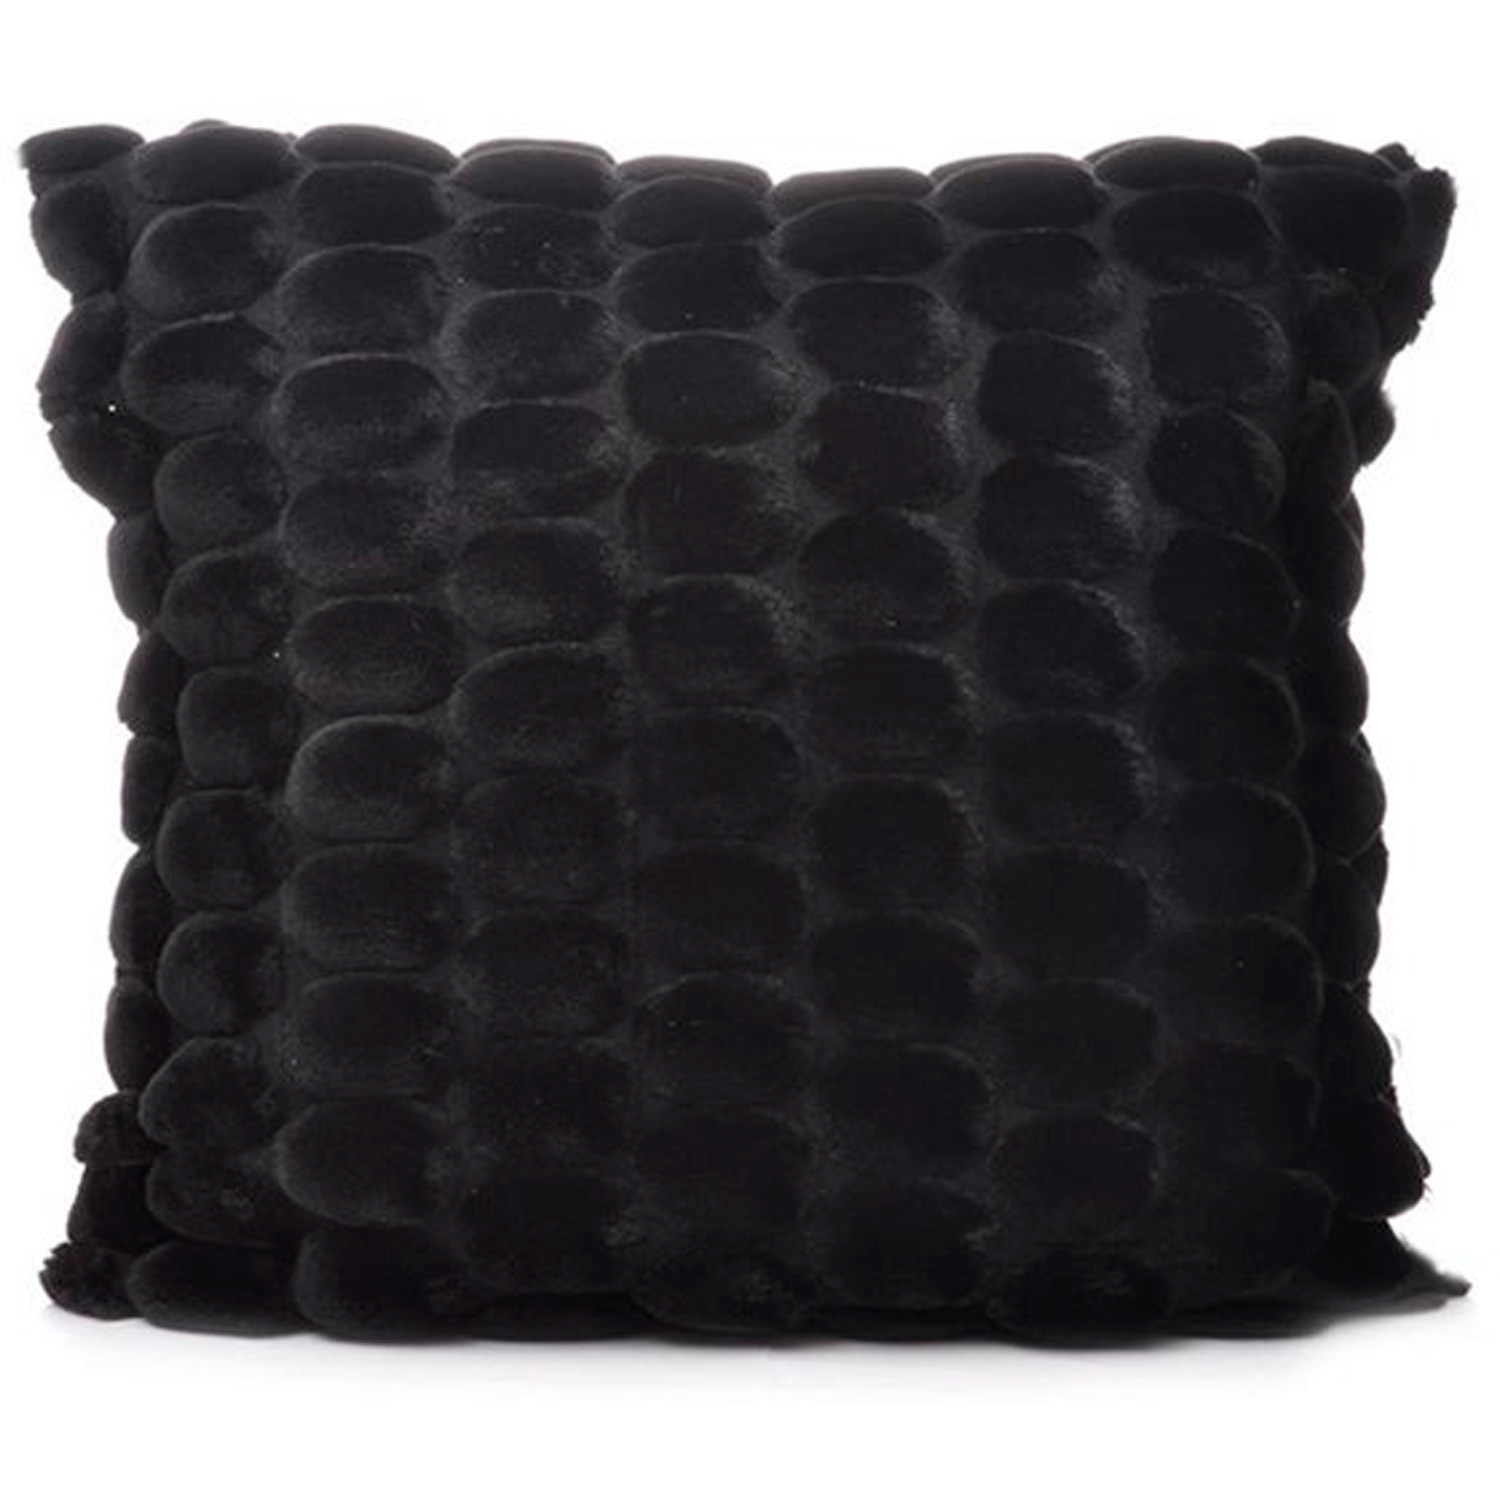 Buy Cushions in London – The best luxury cushions.